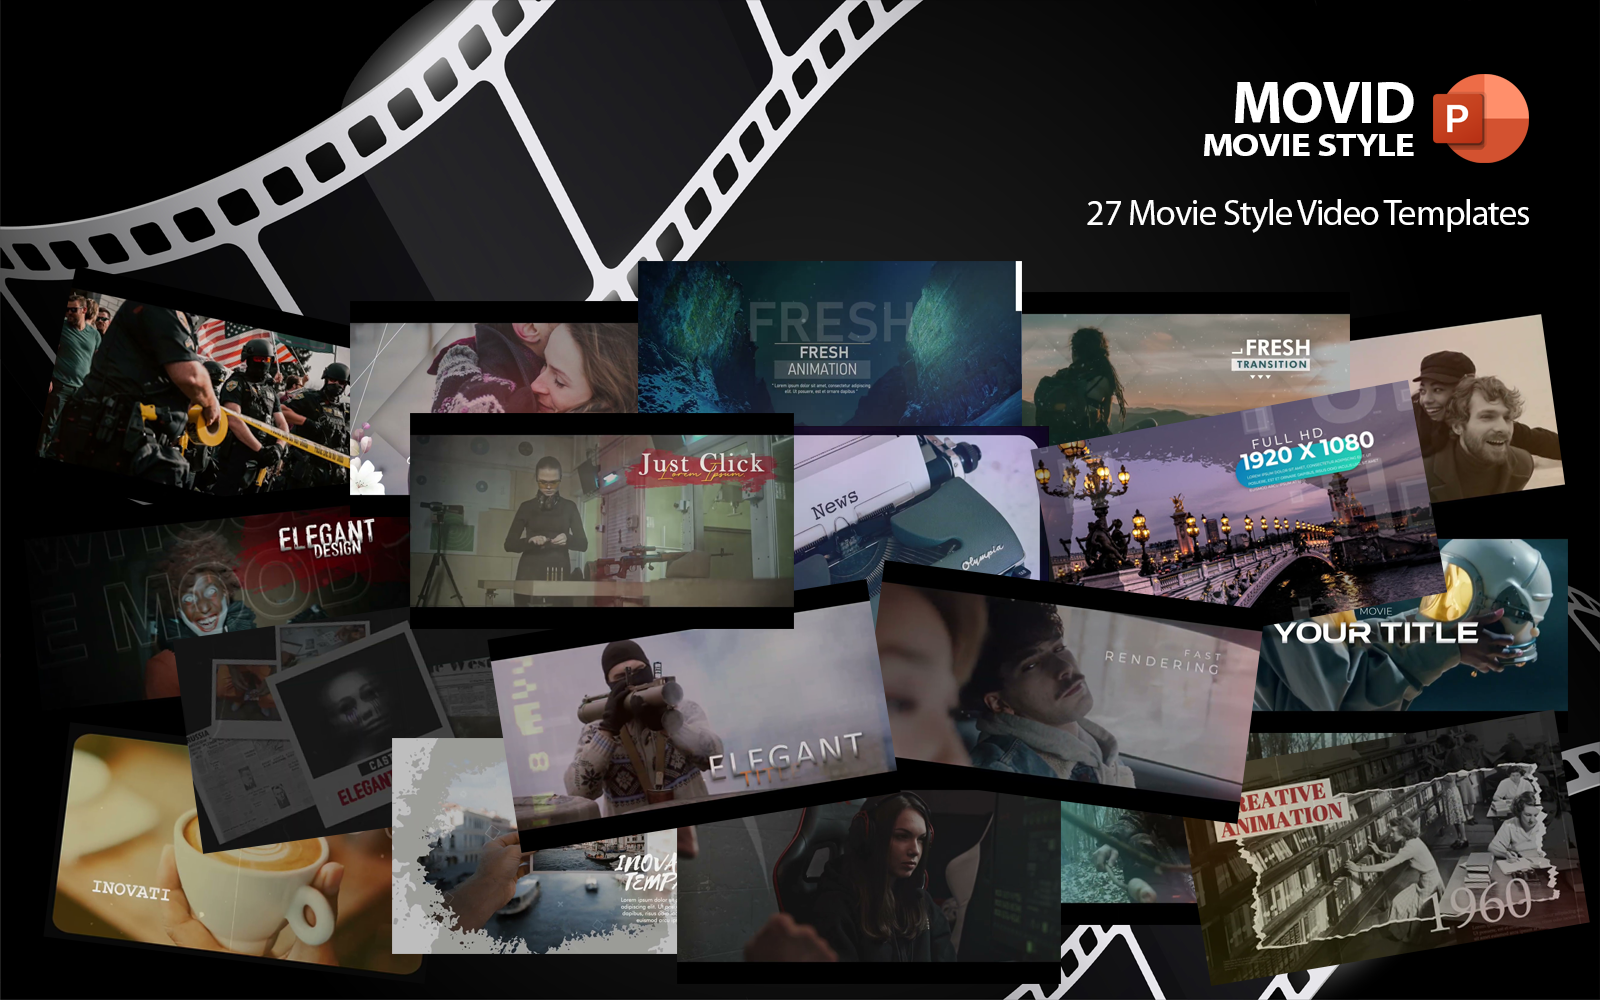 Movid Movie Style Template